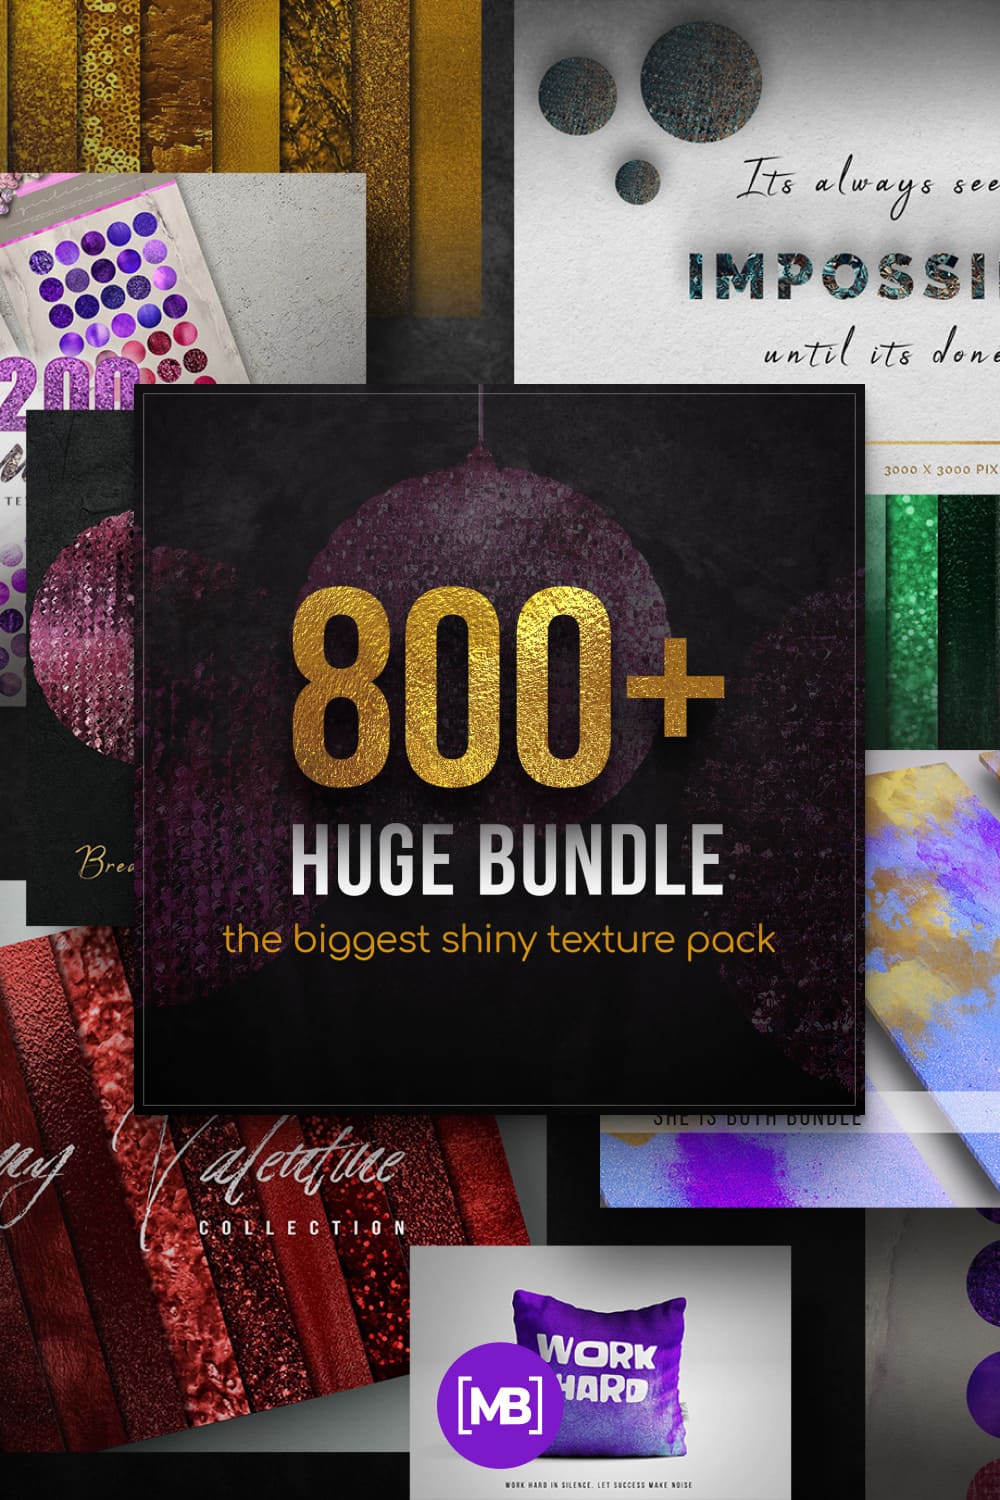 The bundle is packed with shiny and breathtaking textures, that will inspire you to create a stunning design.